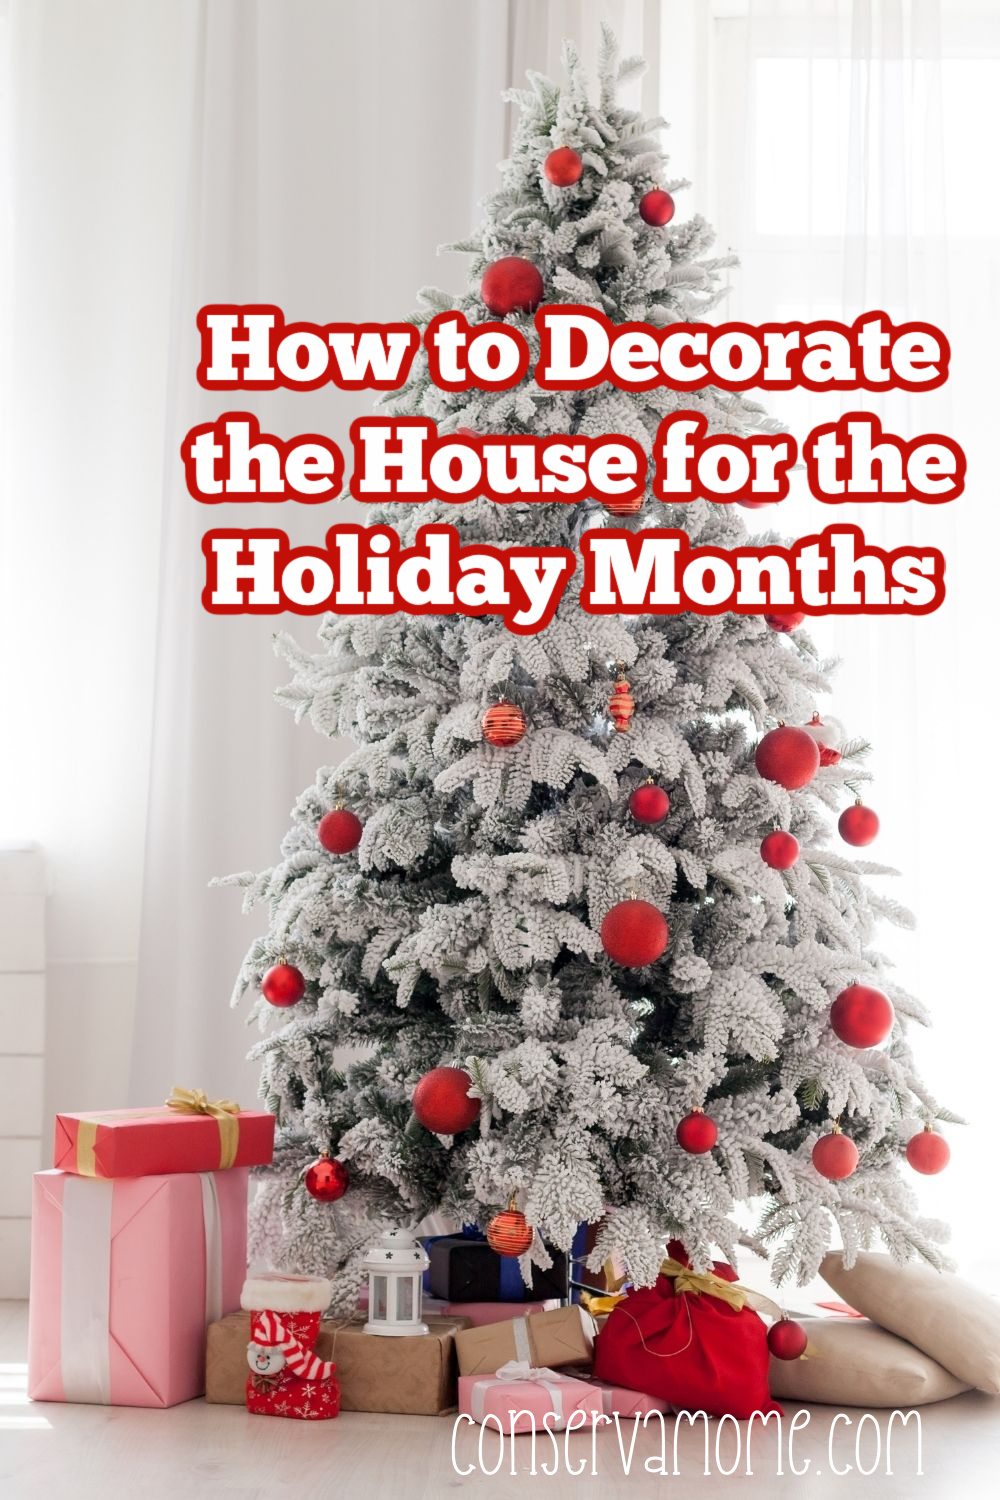 How to Decorate the house for the holiday months